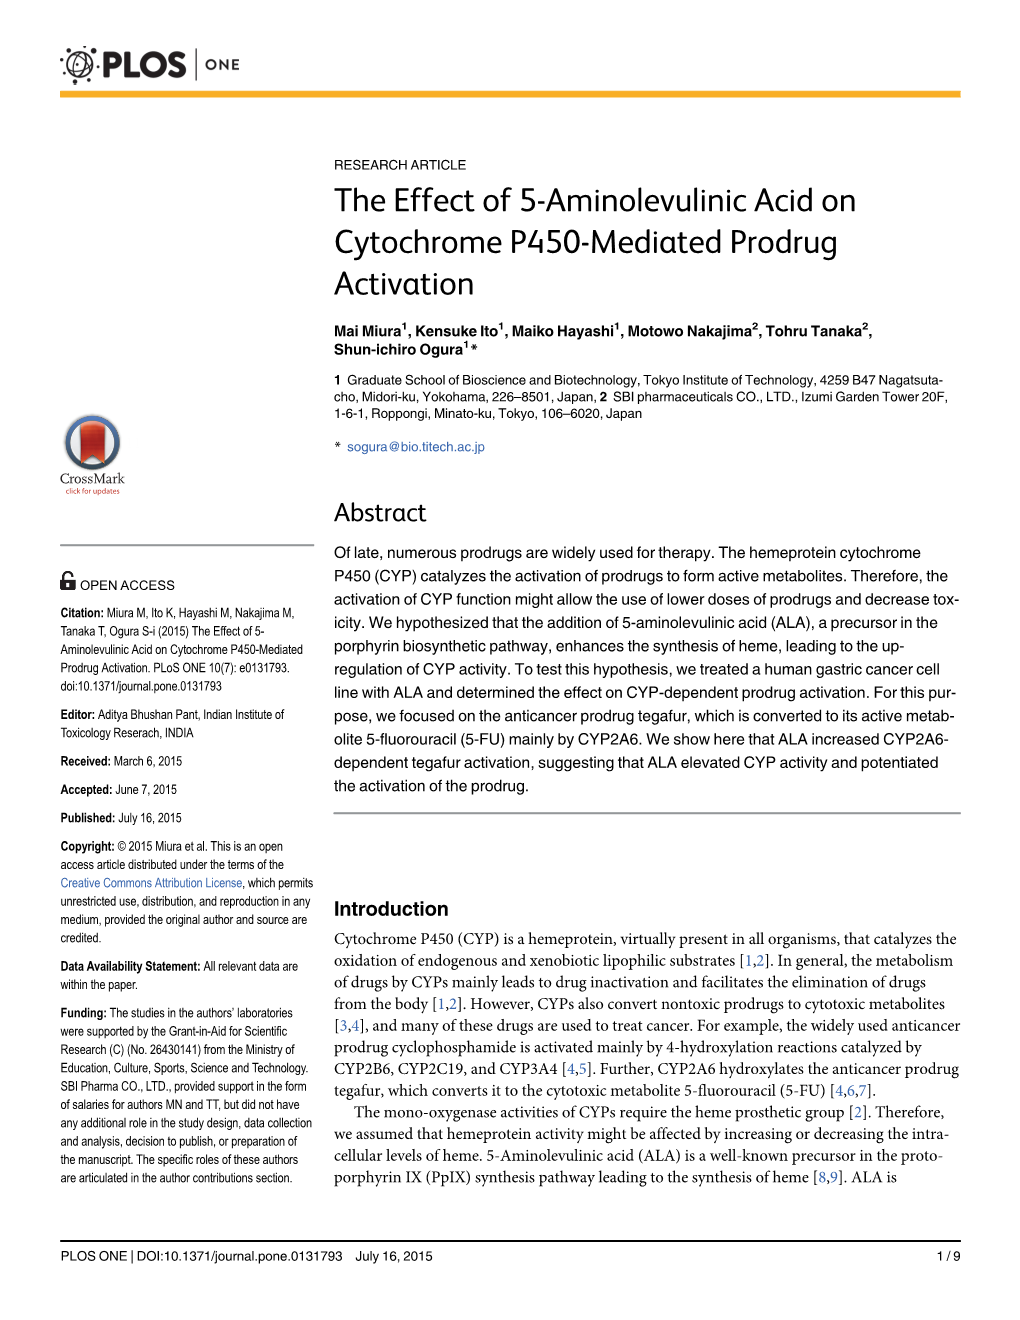 The Effect of 5-Aminolevulinic Acid on Cytochrome P450-Mediated Prodrug Activation